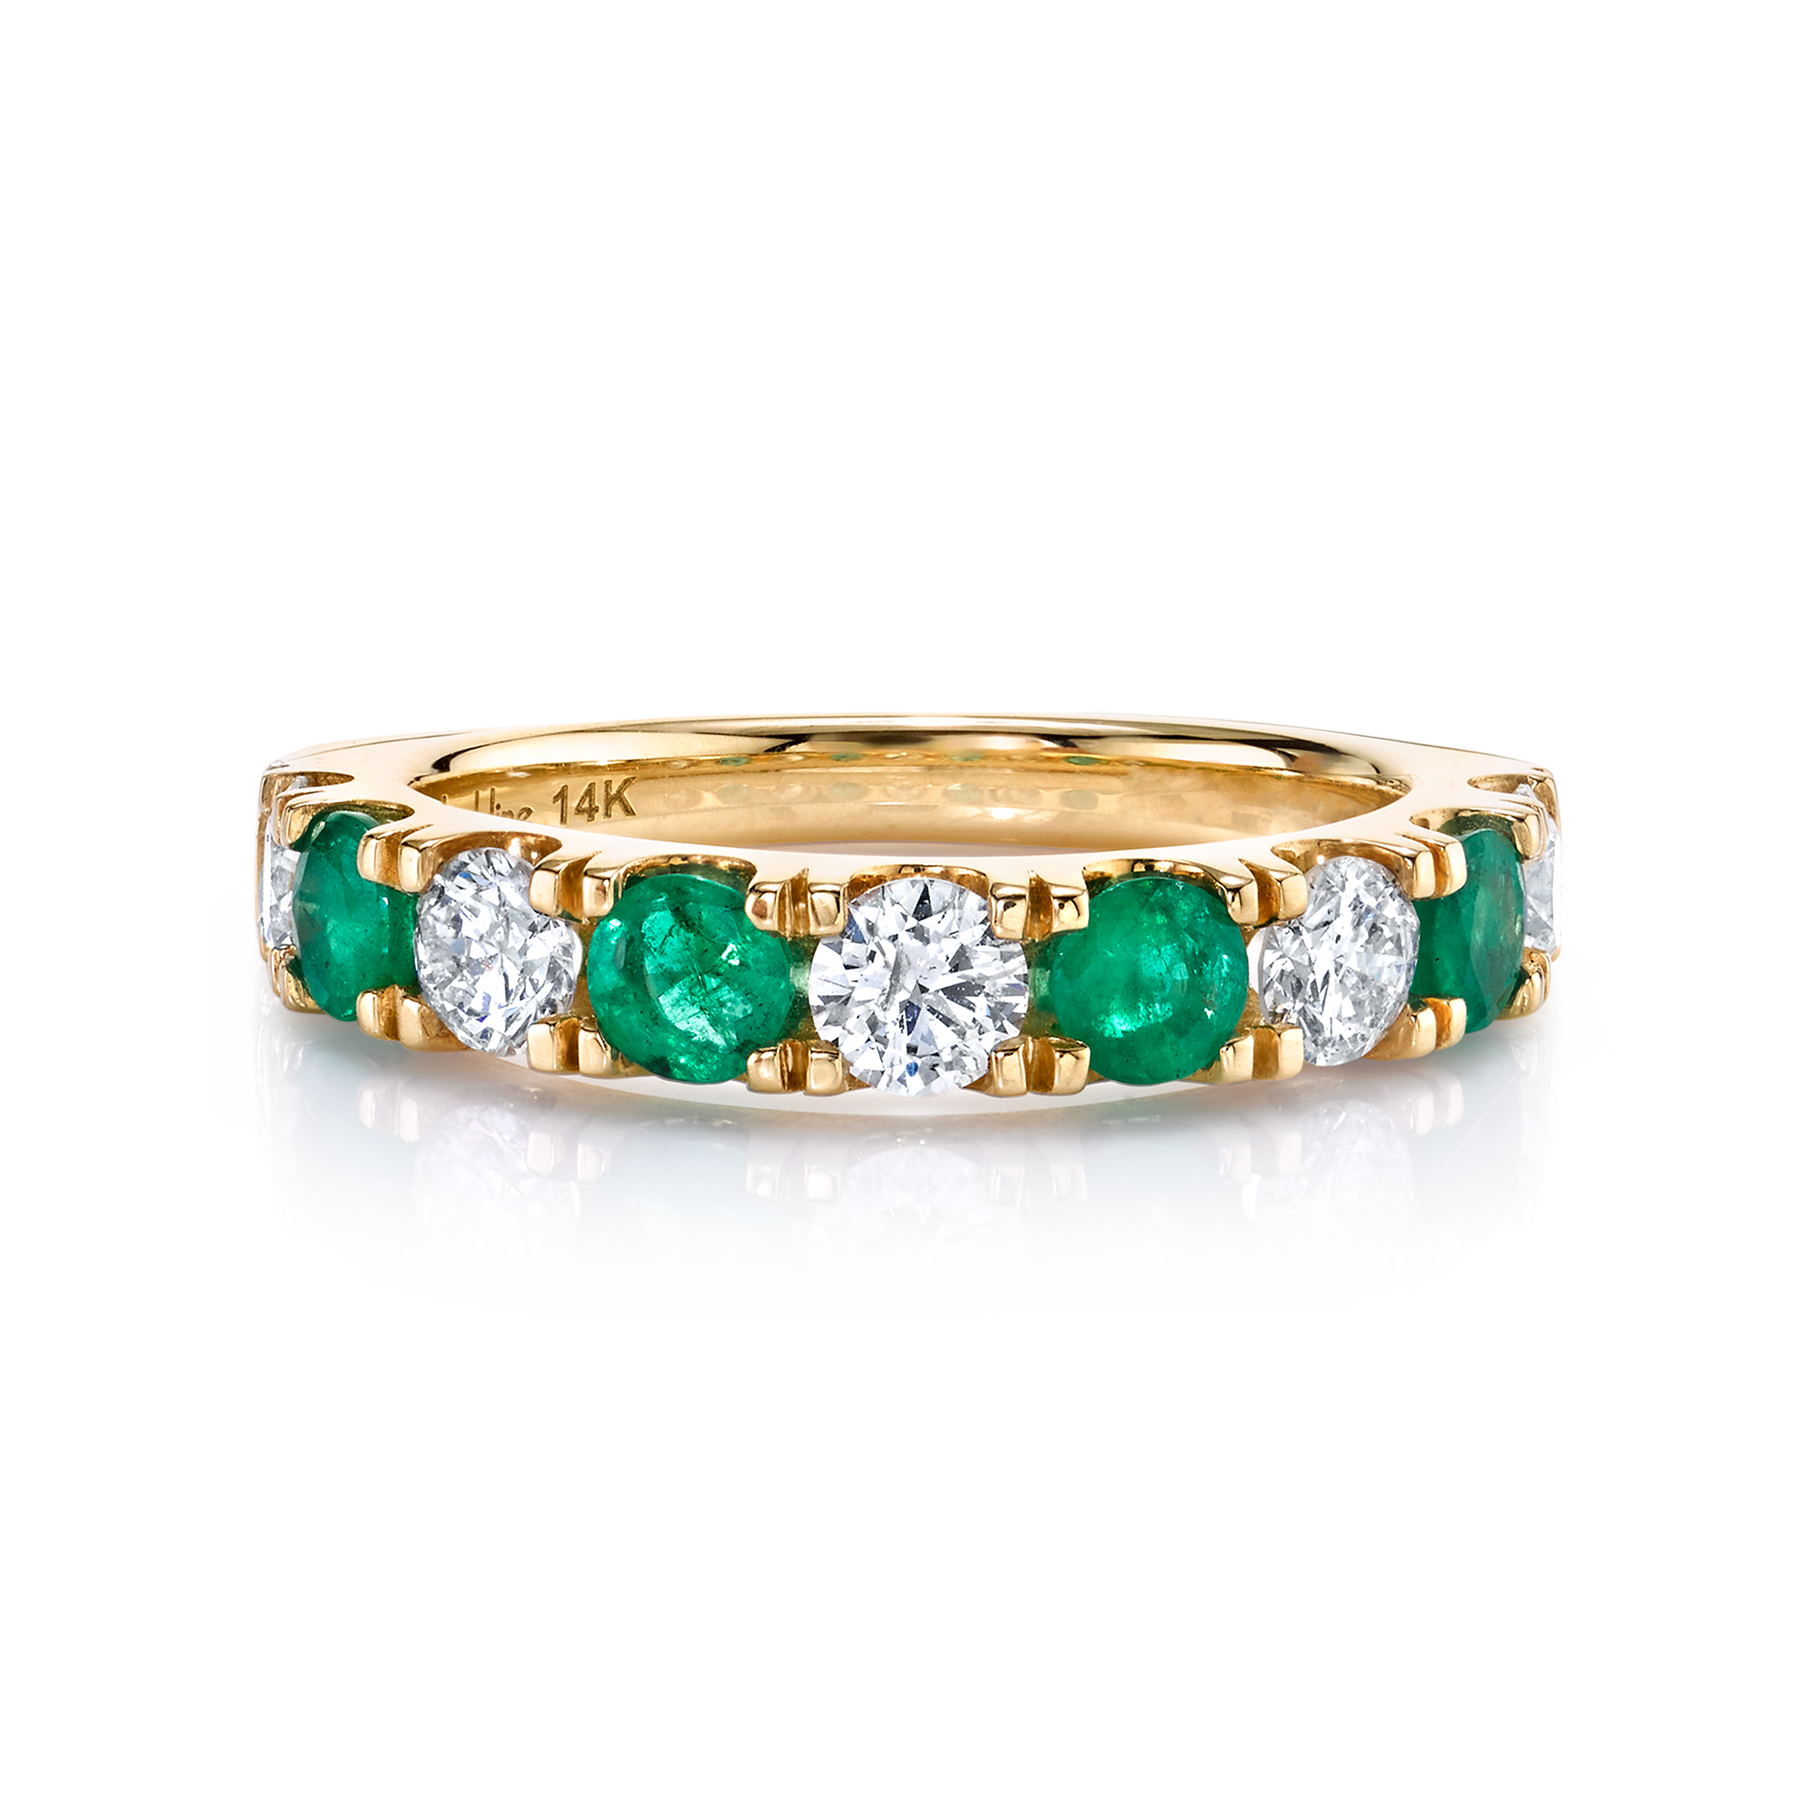 Classic Band - White Diamond and Emerald / 14k Yellow Gold – The Last Line